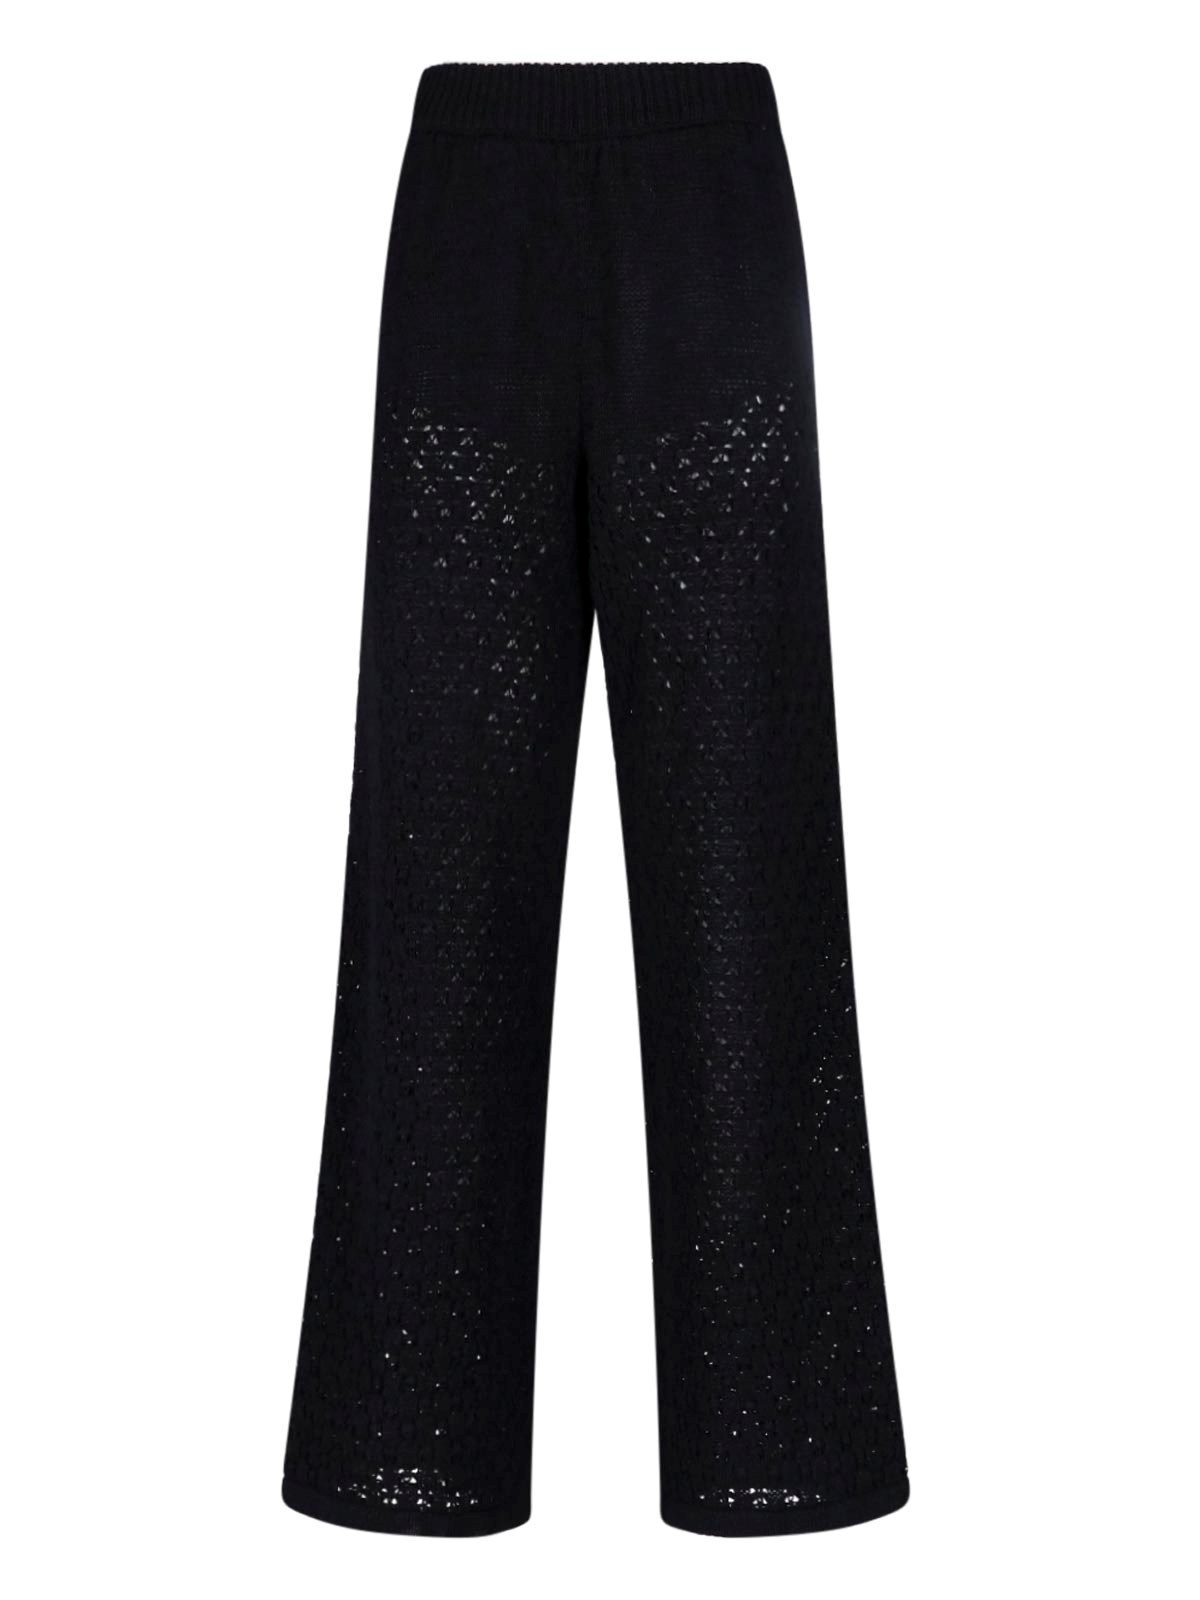 ROTATE BIRGER CHRISTENSEN STRUCTURED KNIT TAPERED trousers